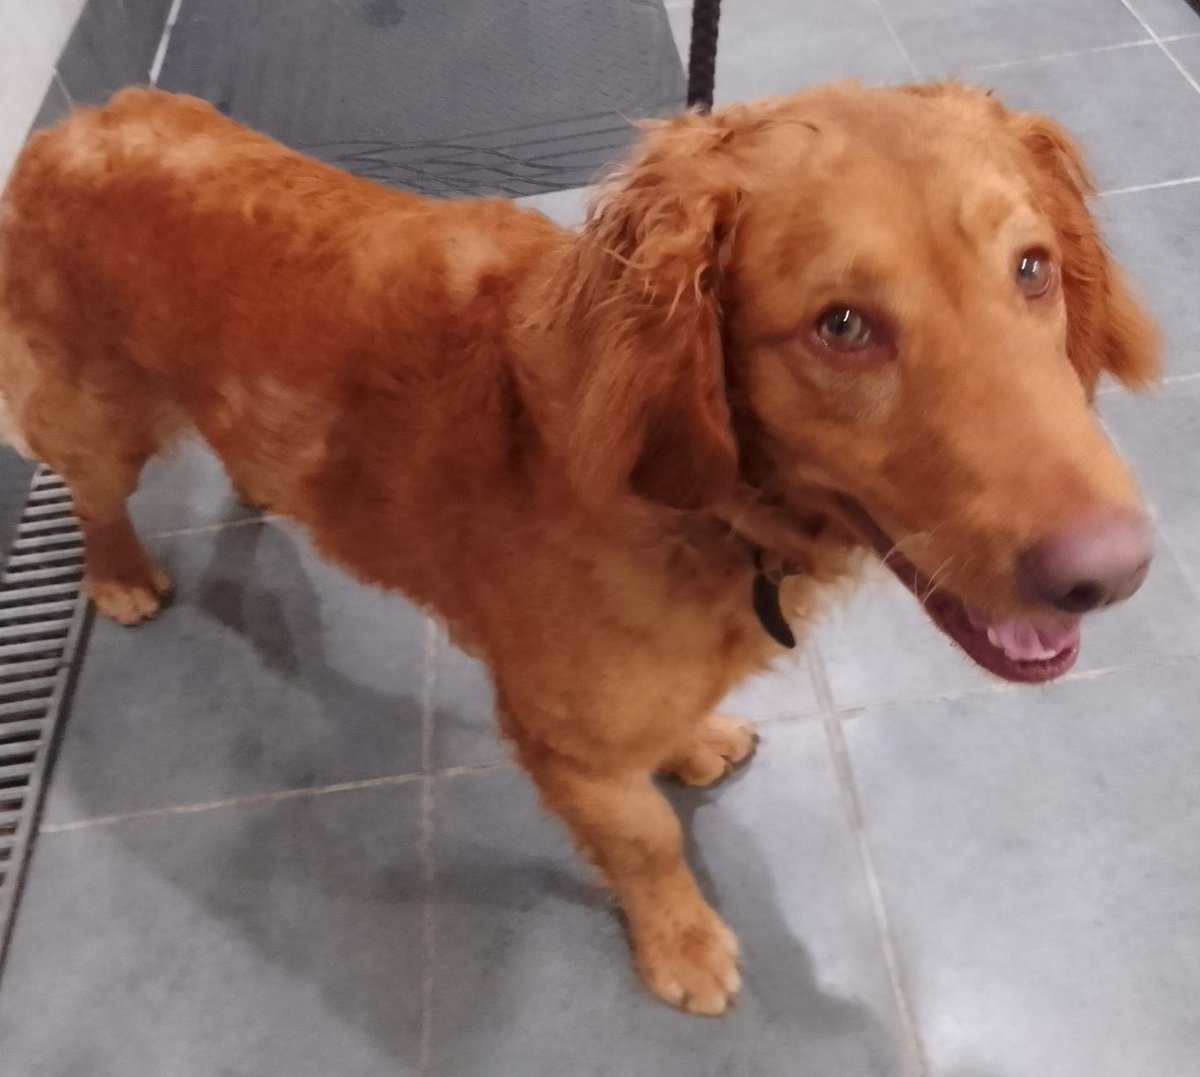 PLEASE REWEET TO HELP FIND THE OWNER OR A RESCUE SPACE FOR THIS STRAY DOG FOUND #MILTONKEYNES #BUCKINGHAMSHIRE #UK . Male Retriever Cross, white on chest and paws. CHIP NOT REGISTERED, found April 18. He could be missing or stolen from another region, please share widely. Proof…